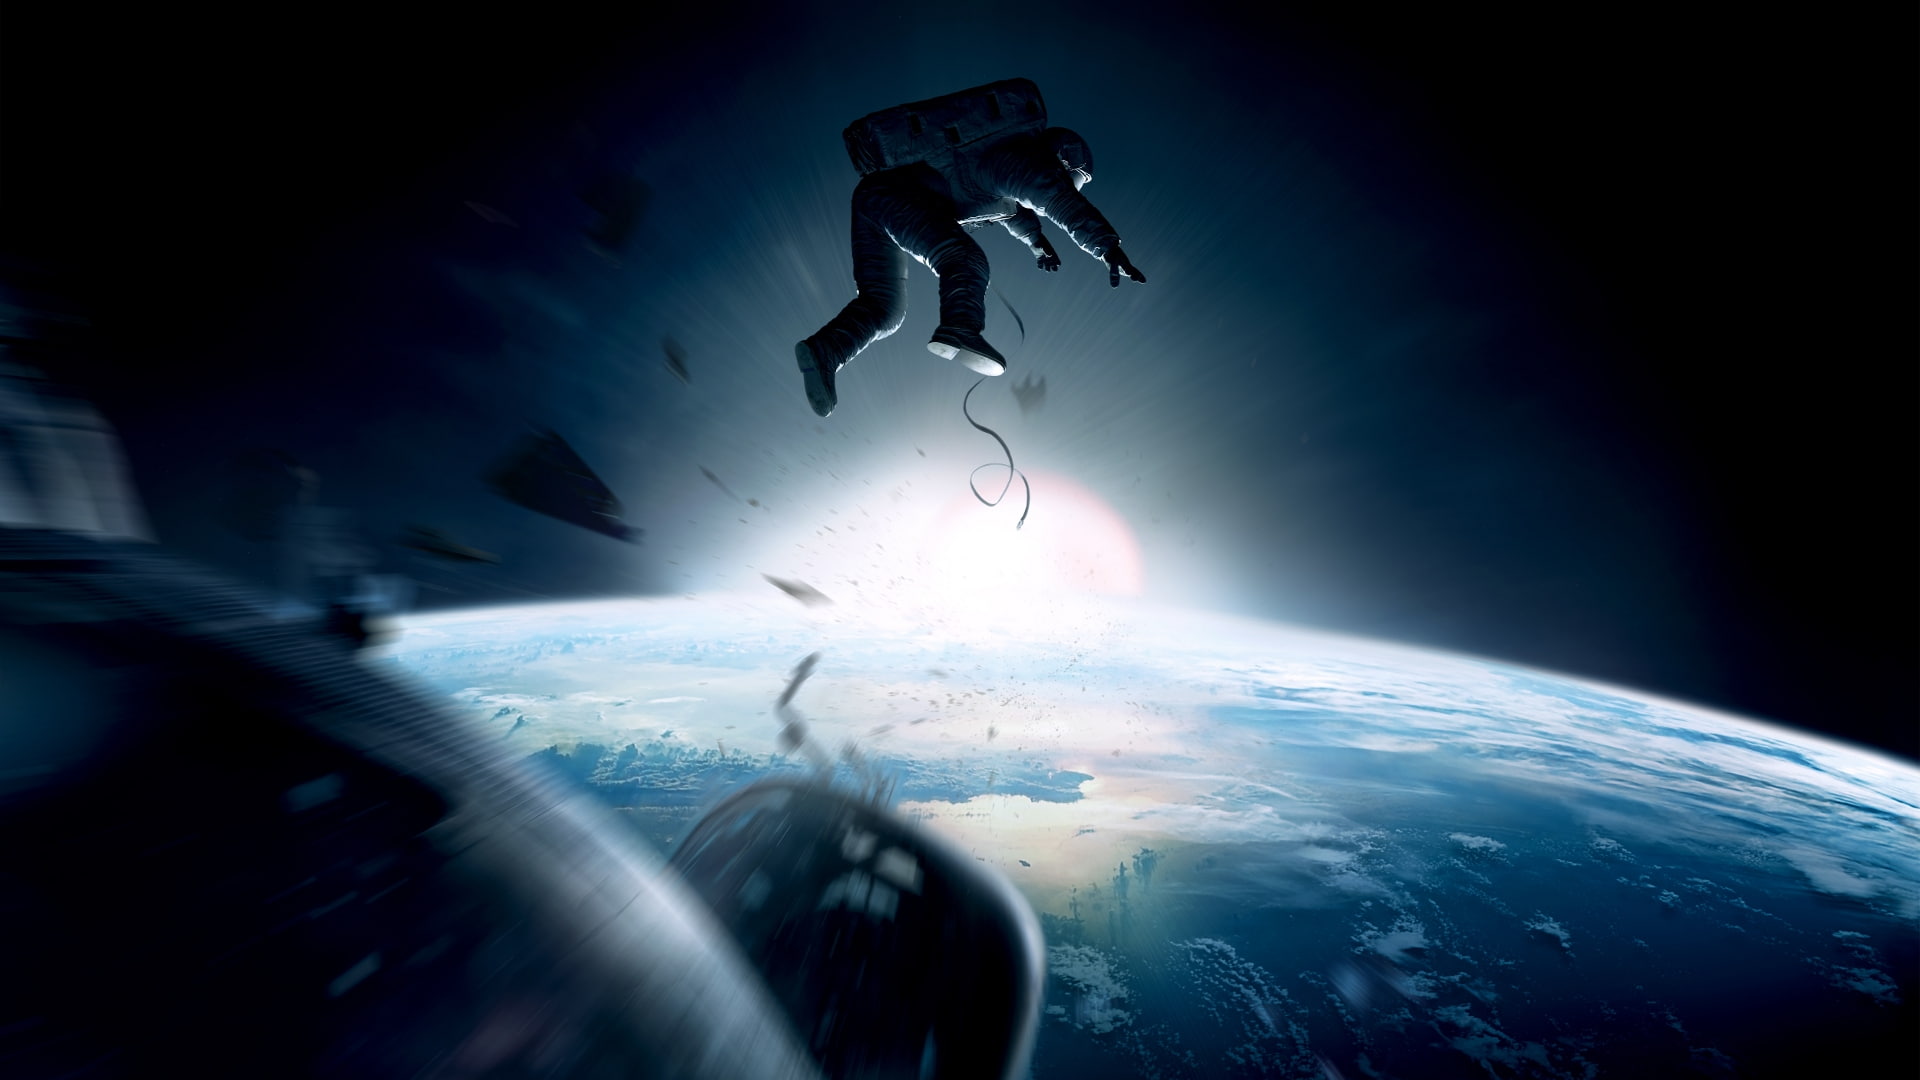 gravity, astronaut, earth, sci-fi, space, Movies, motion, mid-air